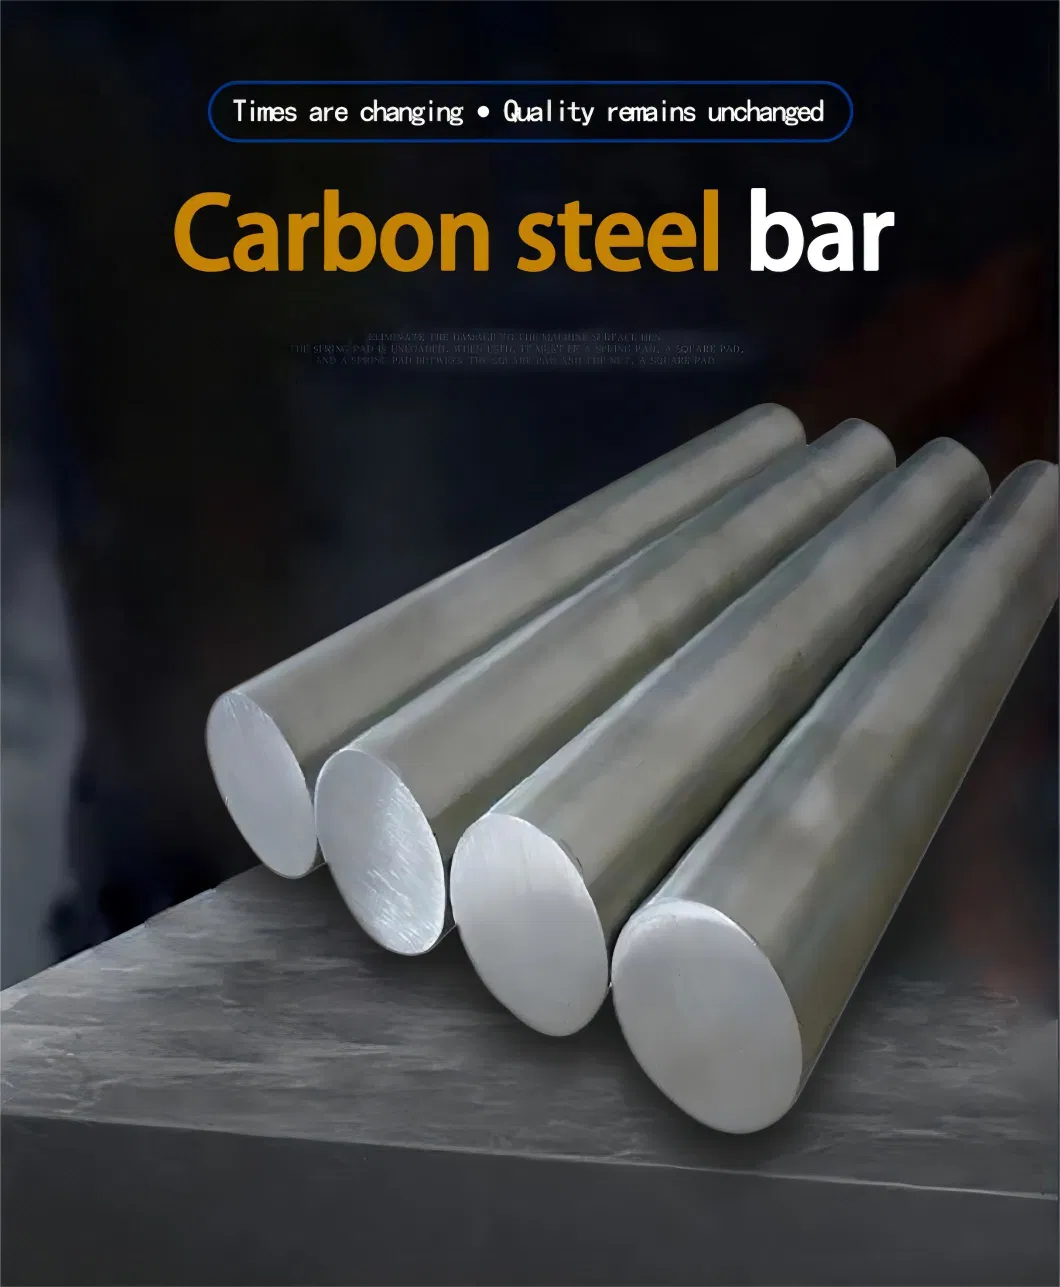 Cast Iron 1.1191/Ck45 1018 Cold Rolled Steel Hot Stick Rod C1045 High Alloy Carbon Steel Bar